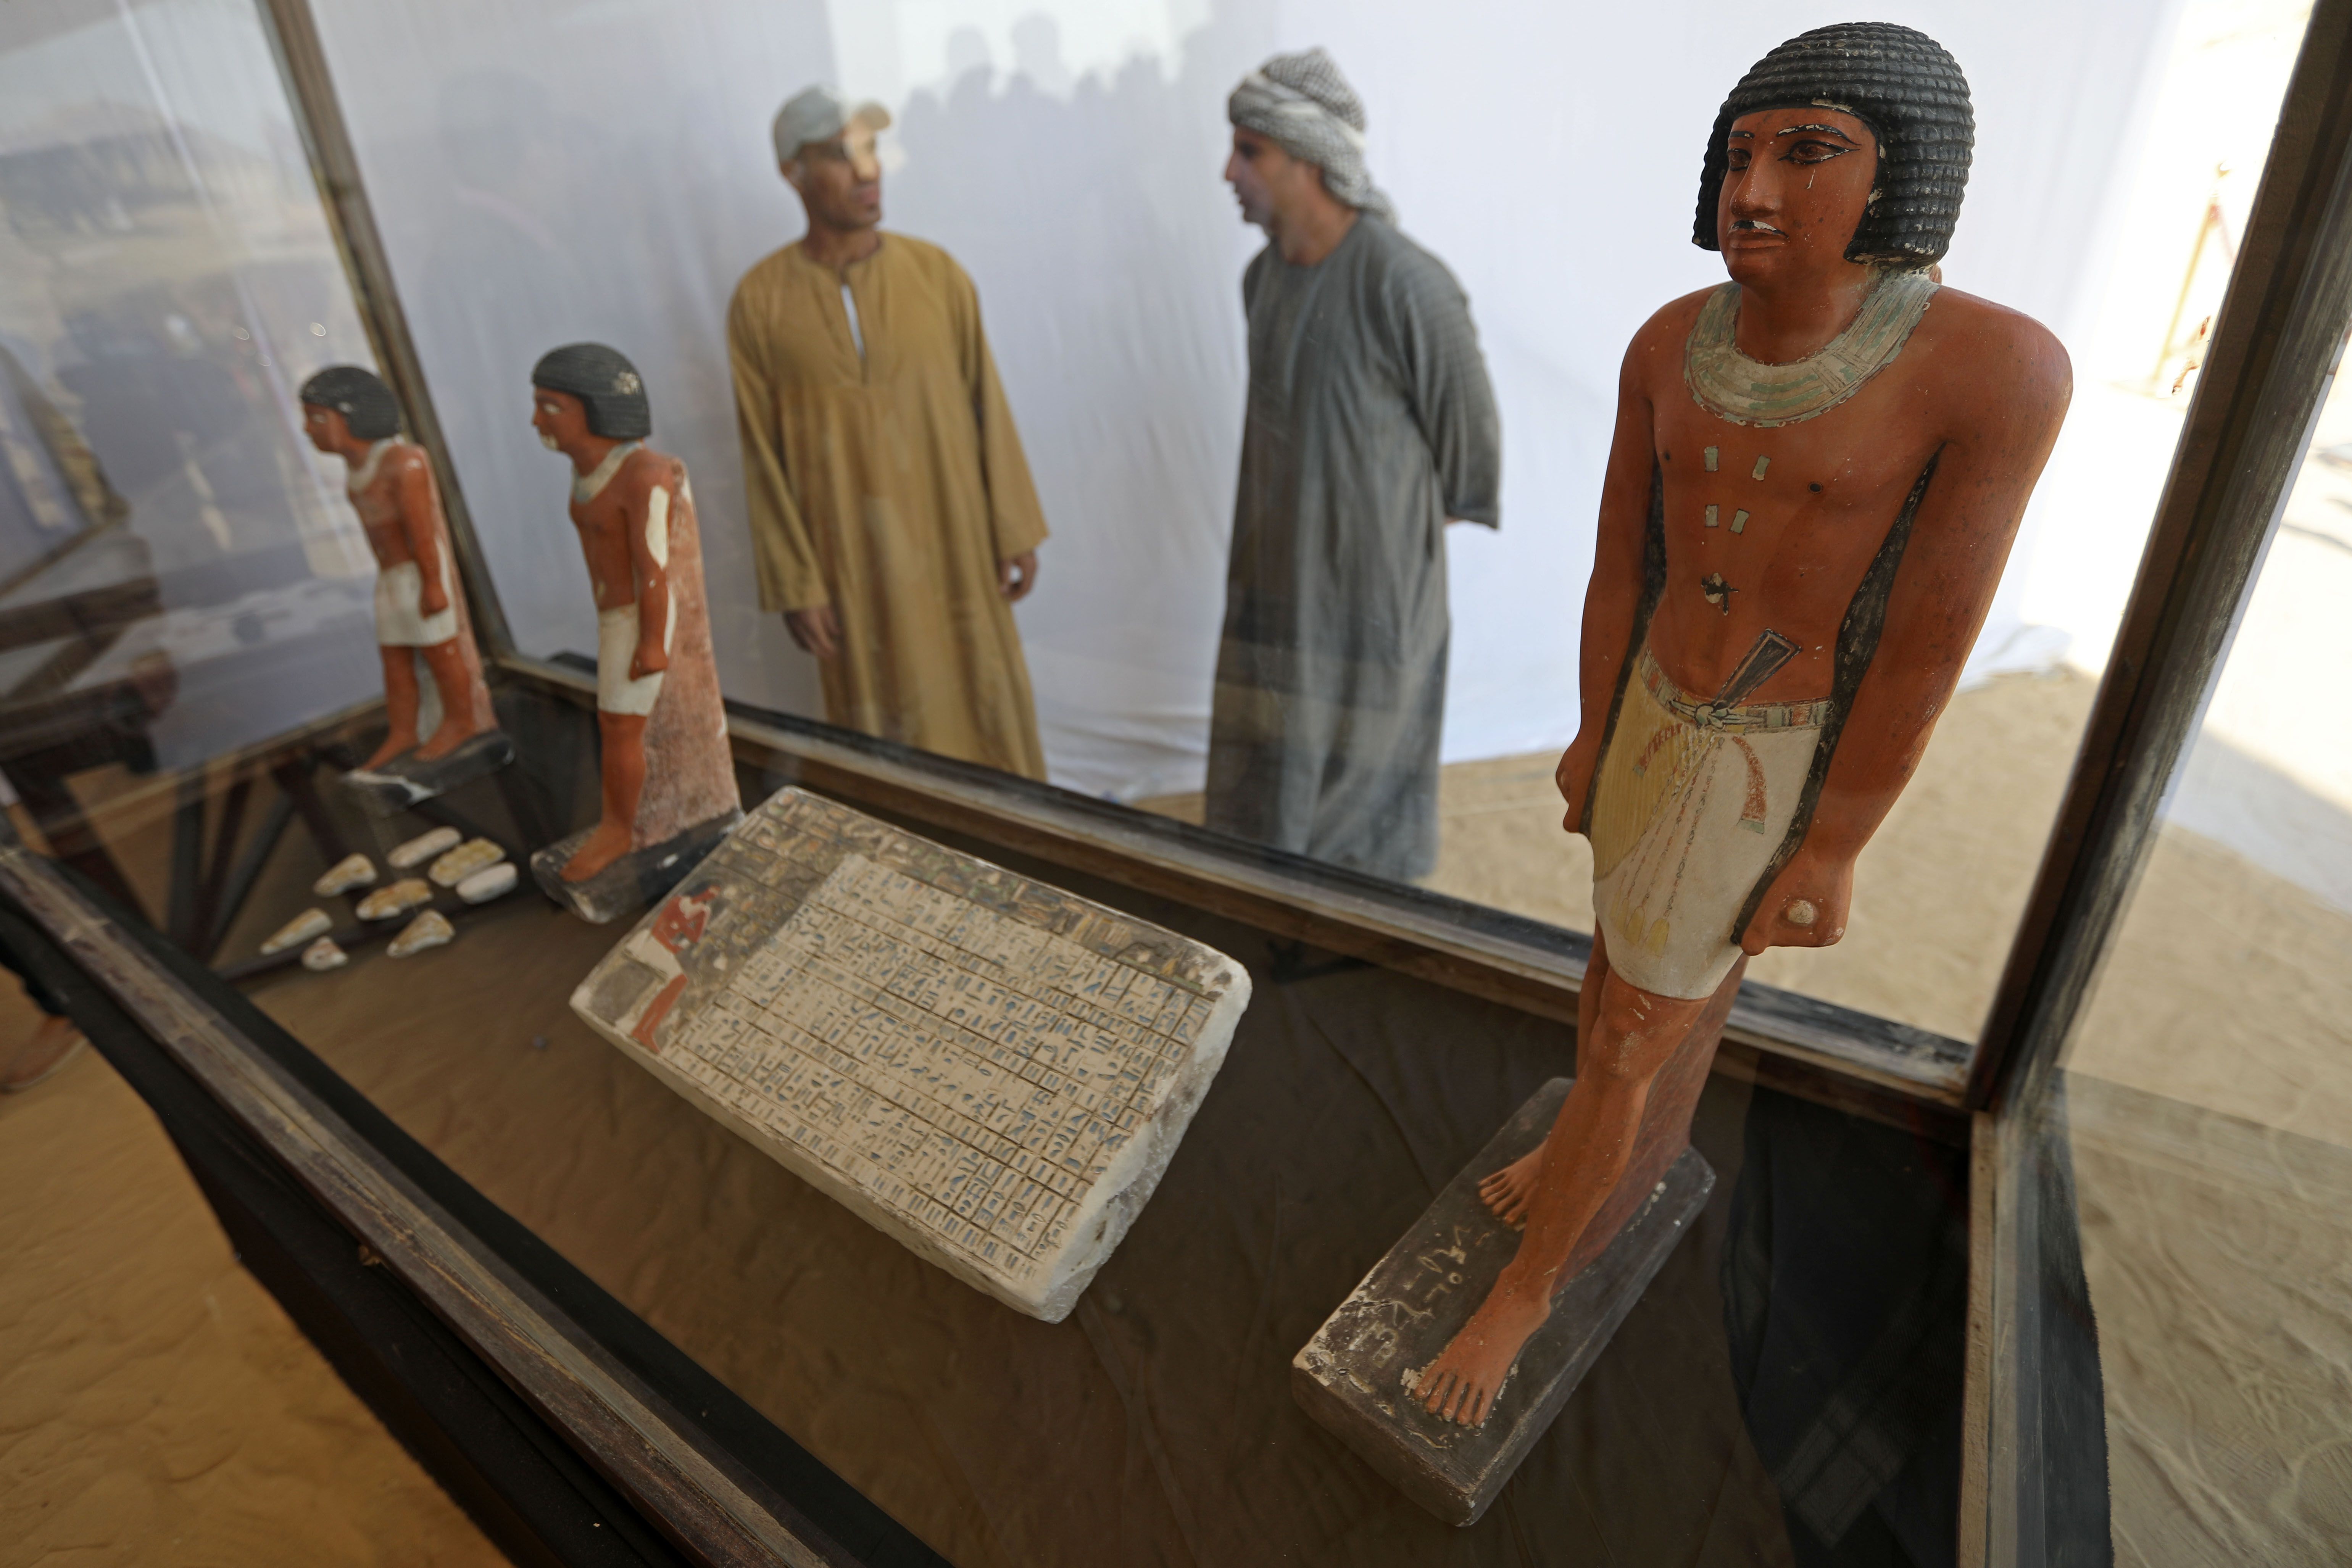 Egyptian antiquities workers observe recently discovered artifacts 